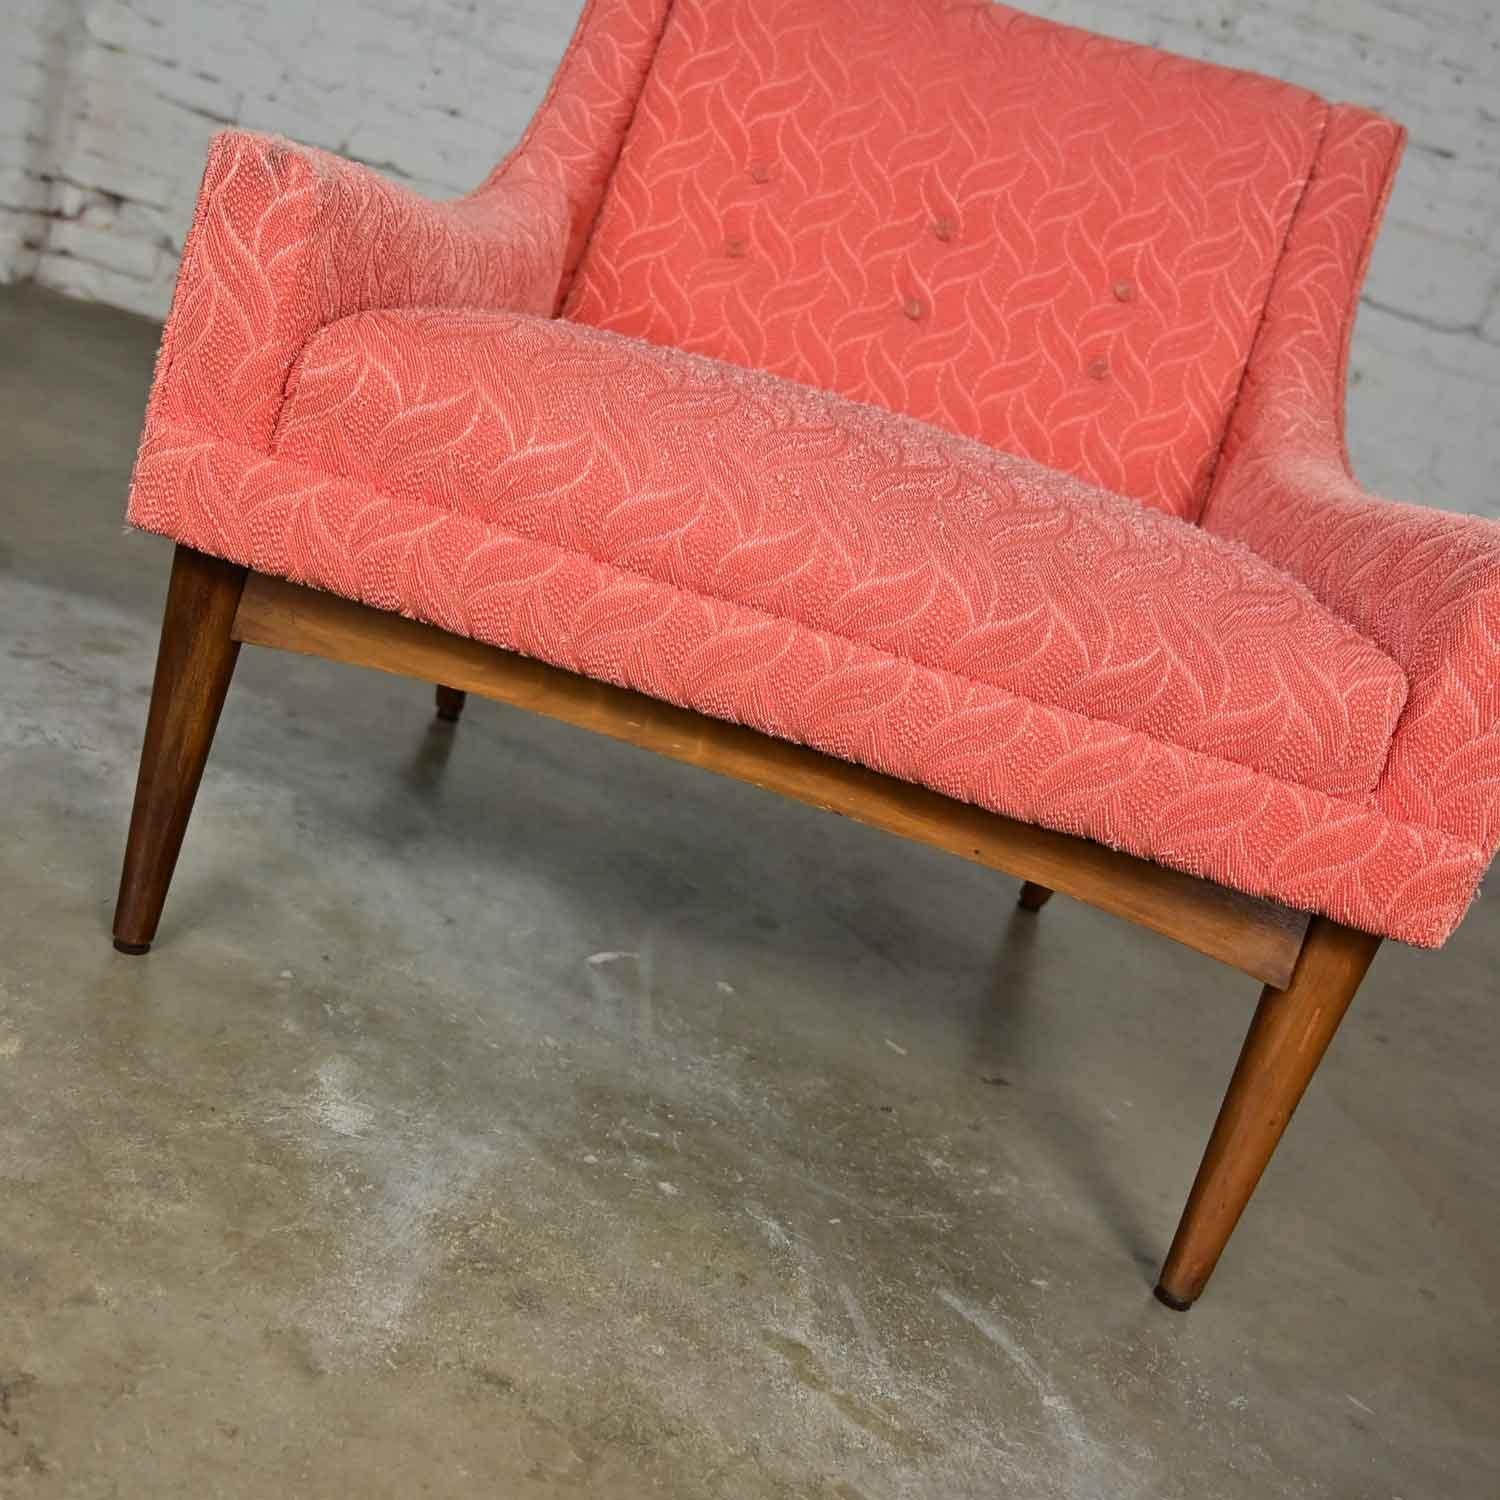 Vintage Mid-Century Modern Coral Frieze Upholstered Modified Slipper Chair For Sale 3